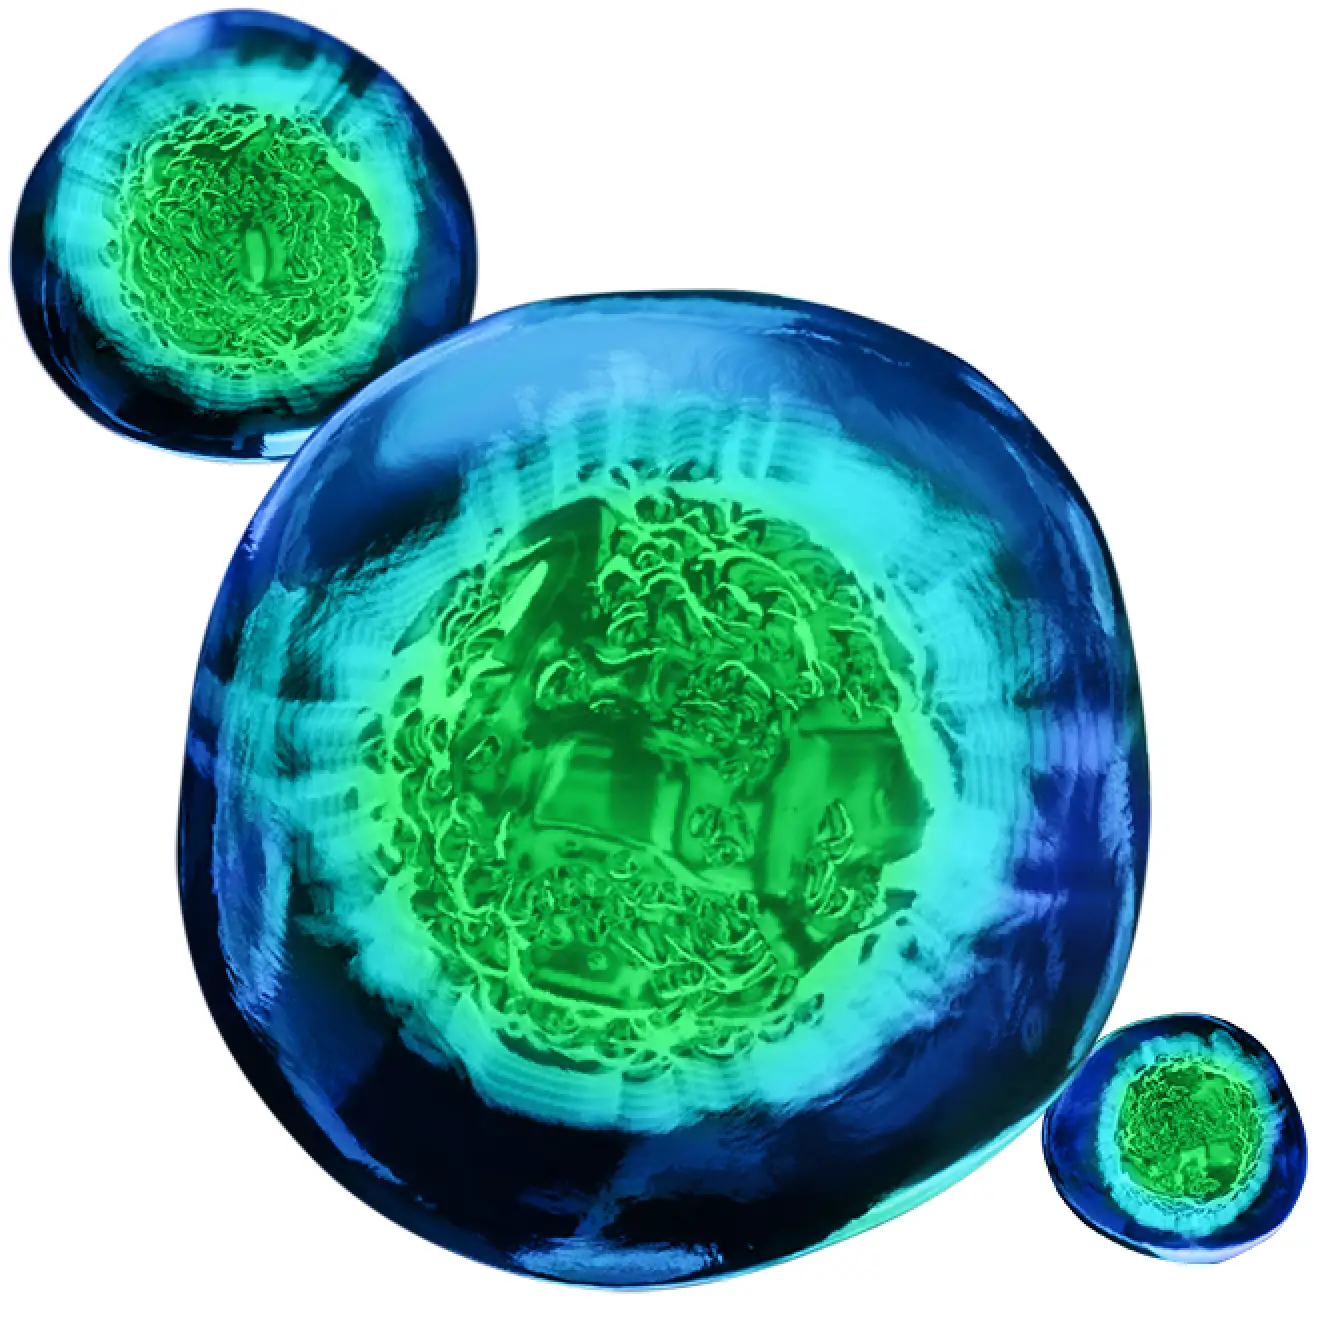 Image of 3 high-definition cells